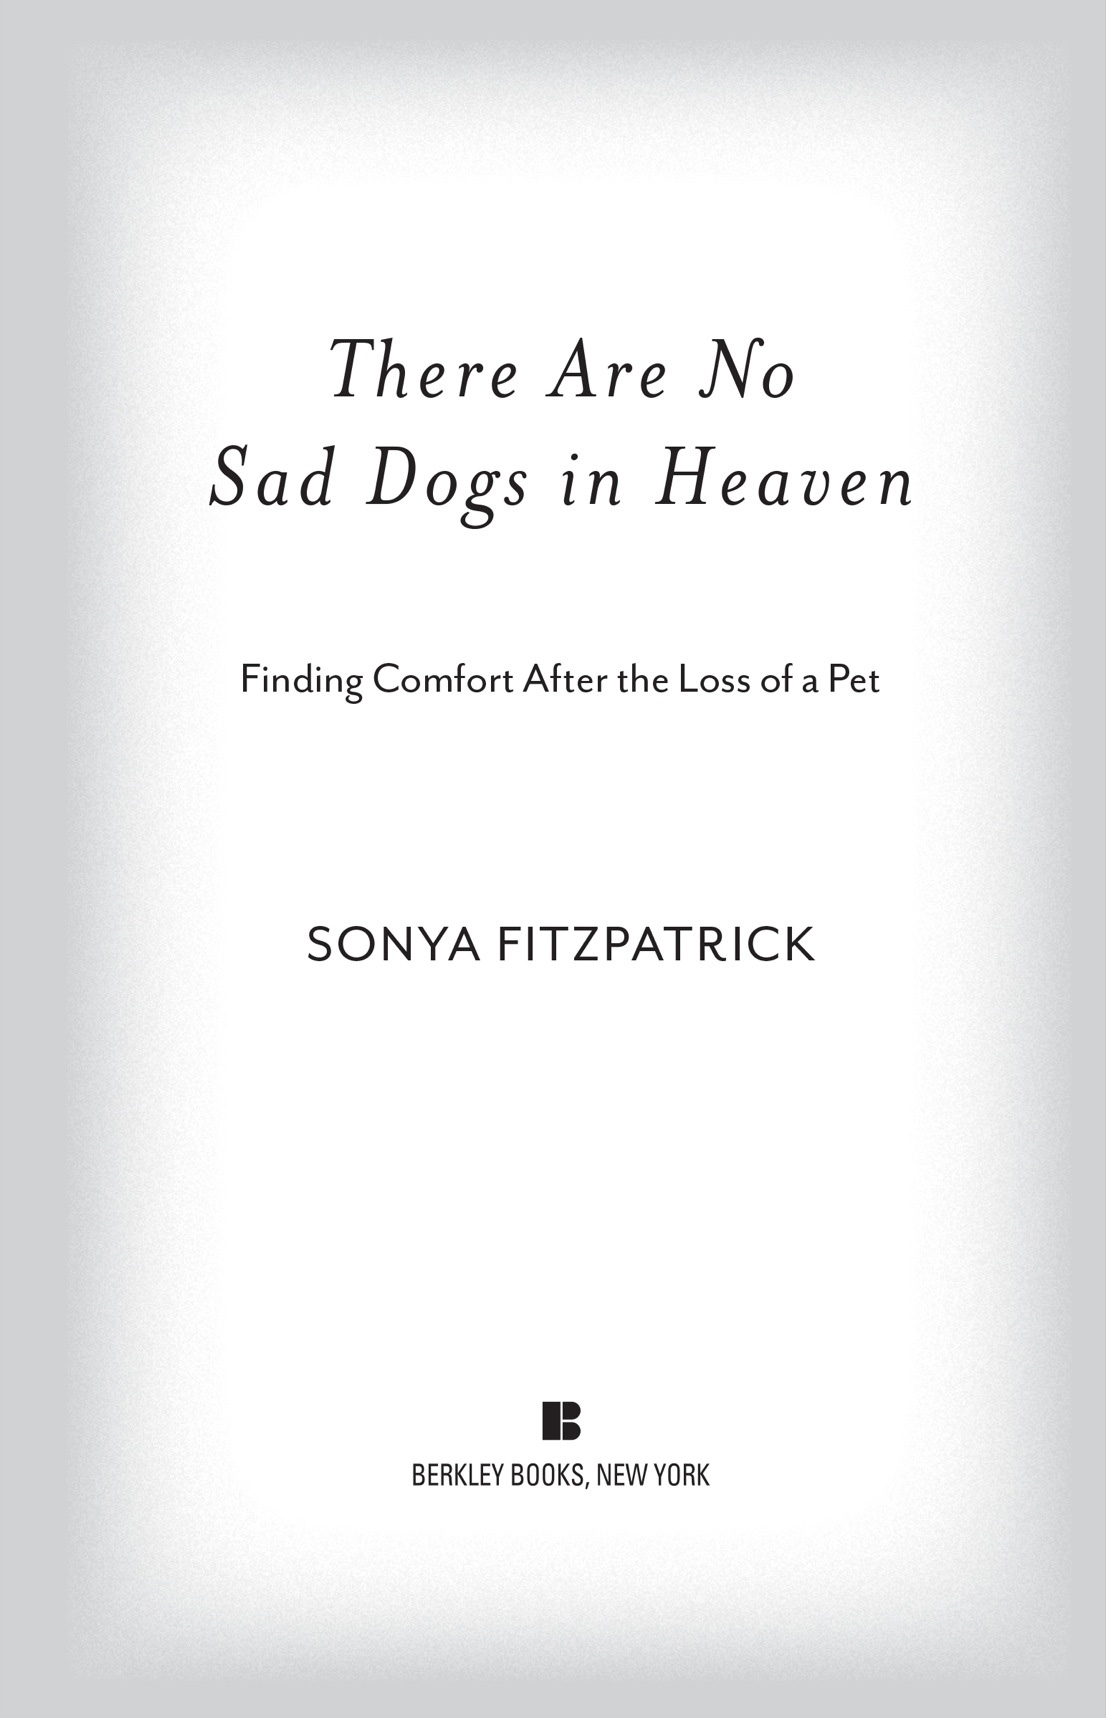 There Are No Sad Dogs in Heaven Finding Comfort After the Loss of a Pet - image 2